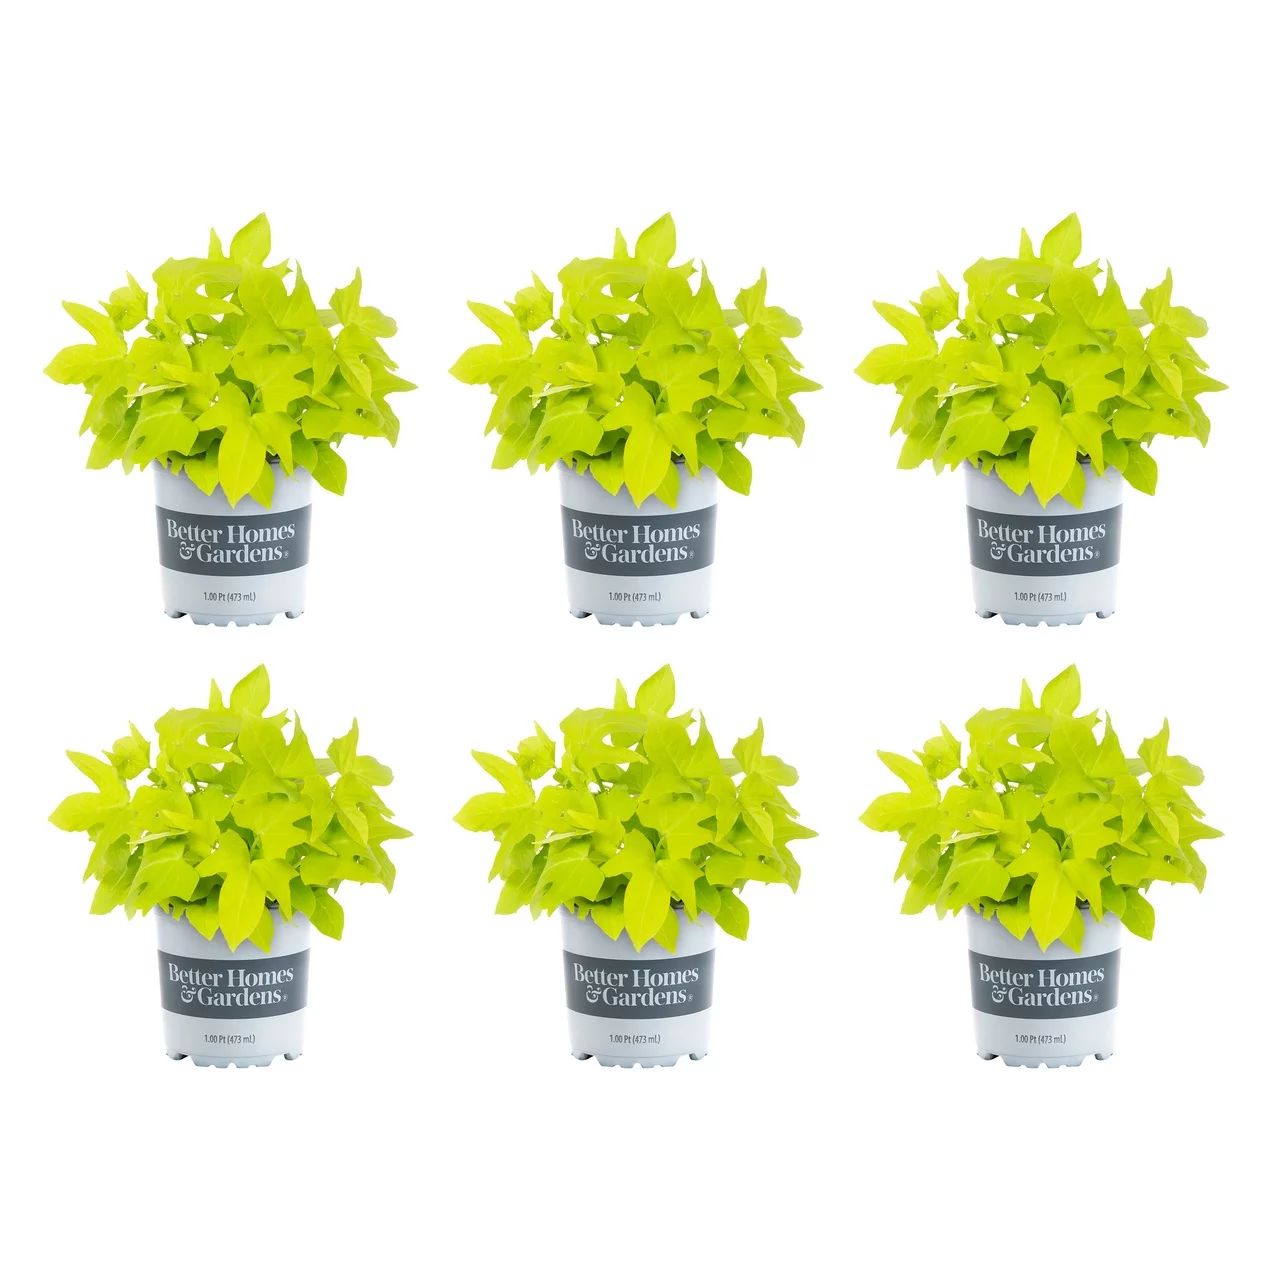 Better Homes & Gardens 1PT Green Ipomoea Annual Live Plants (6 Pack) with Grower Pot | Walmart (US)